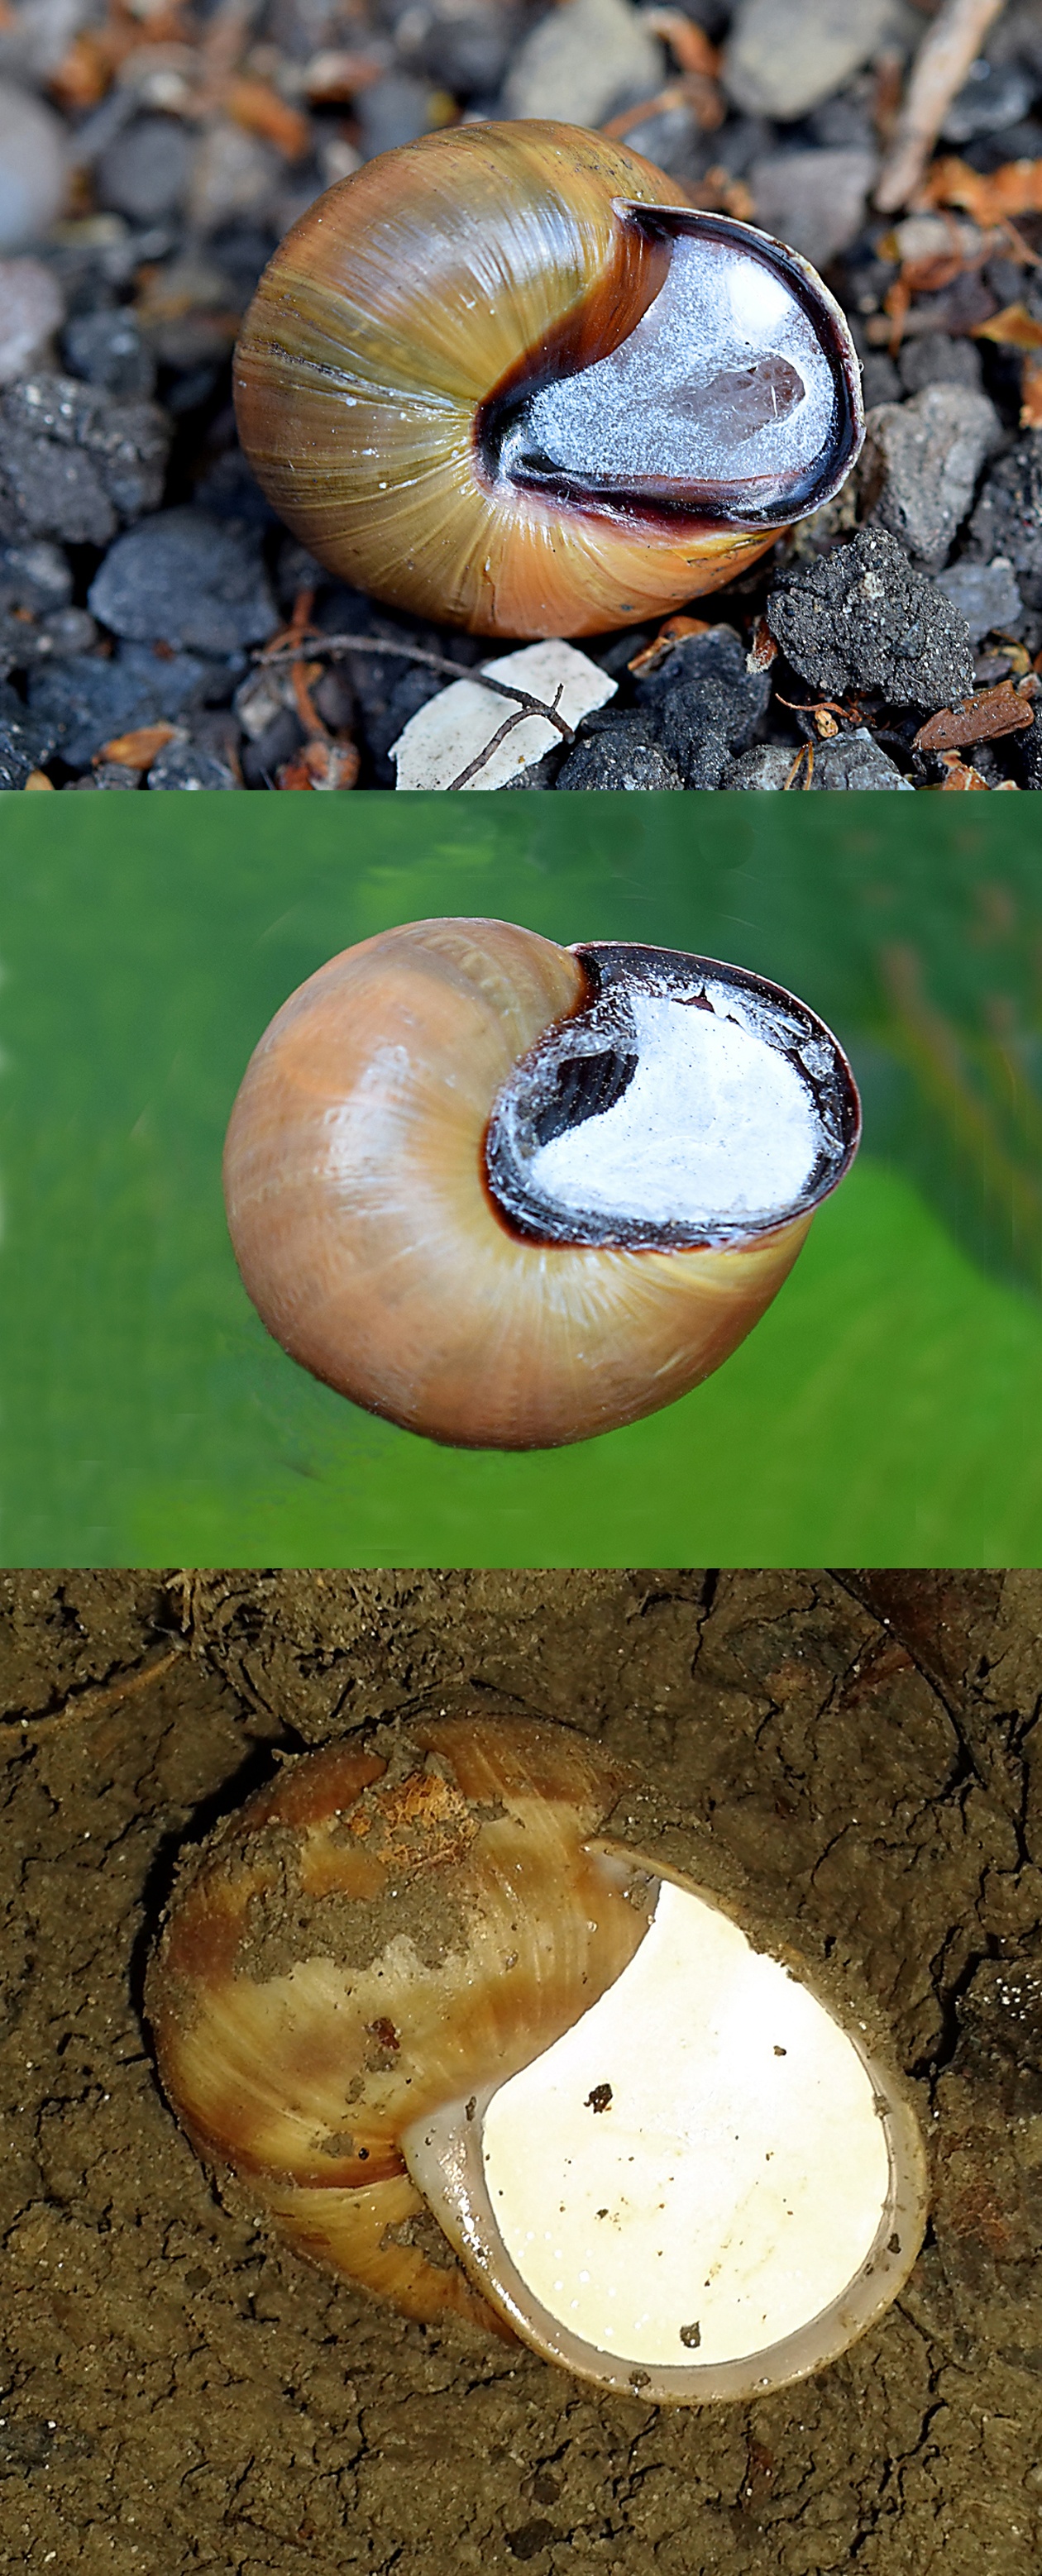 What do snails do when they are cold?